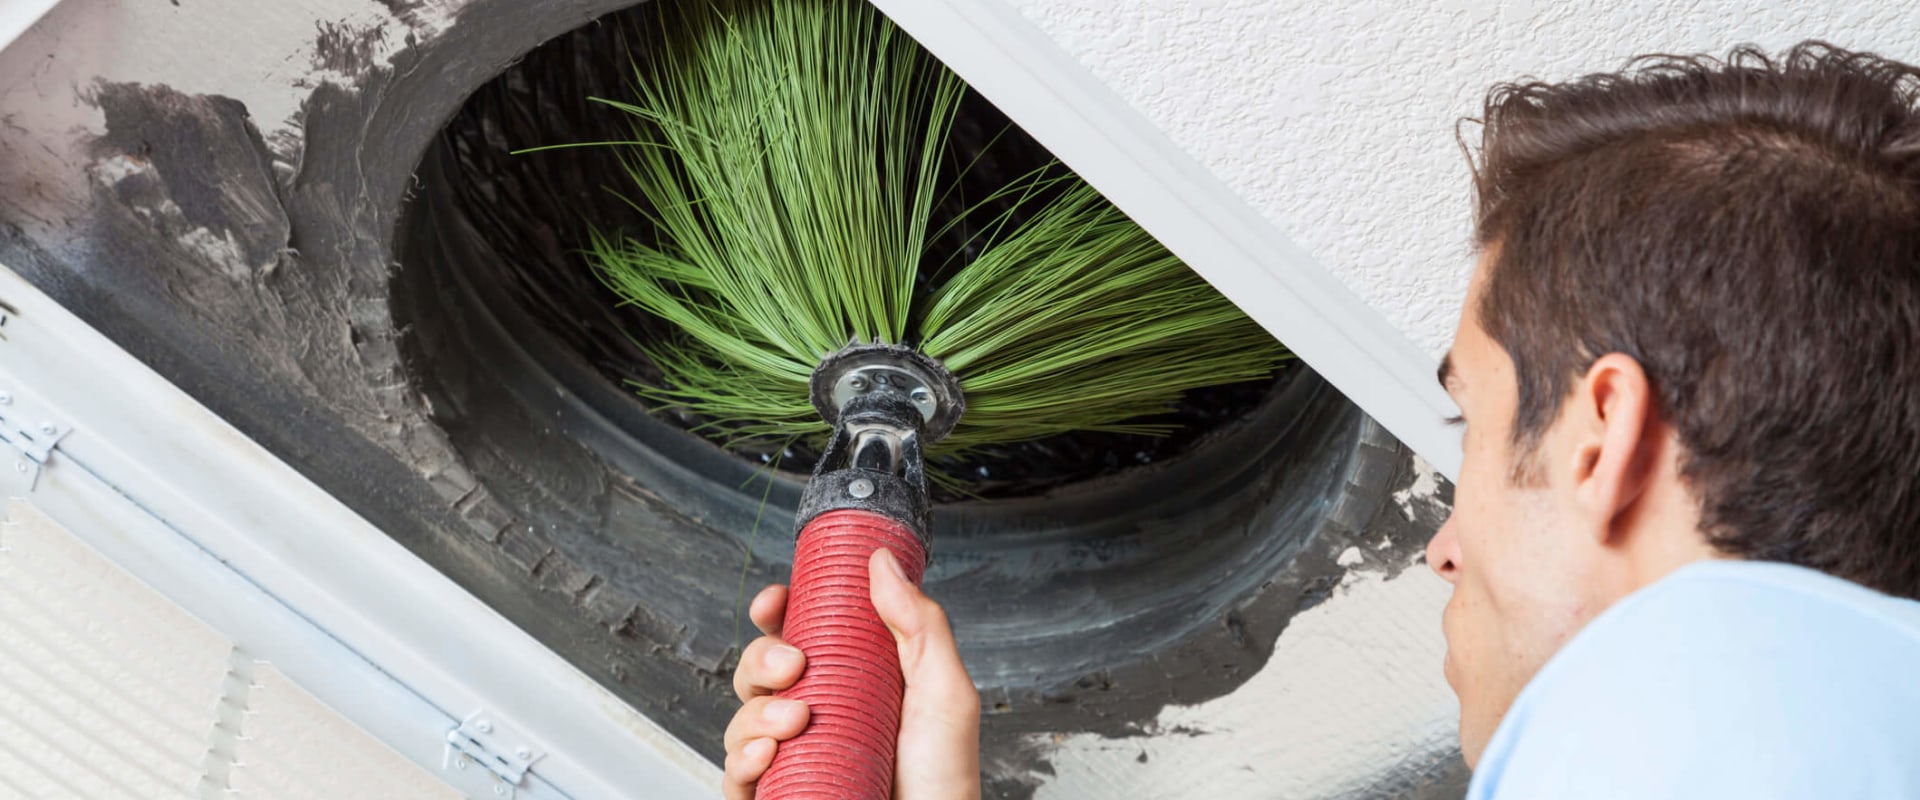 Maintaining Your Home's Air Quality: What You Need to Know About Vent Cleaning in Palm Beach County, FL